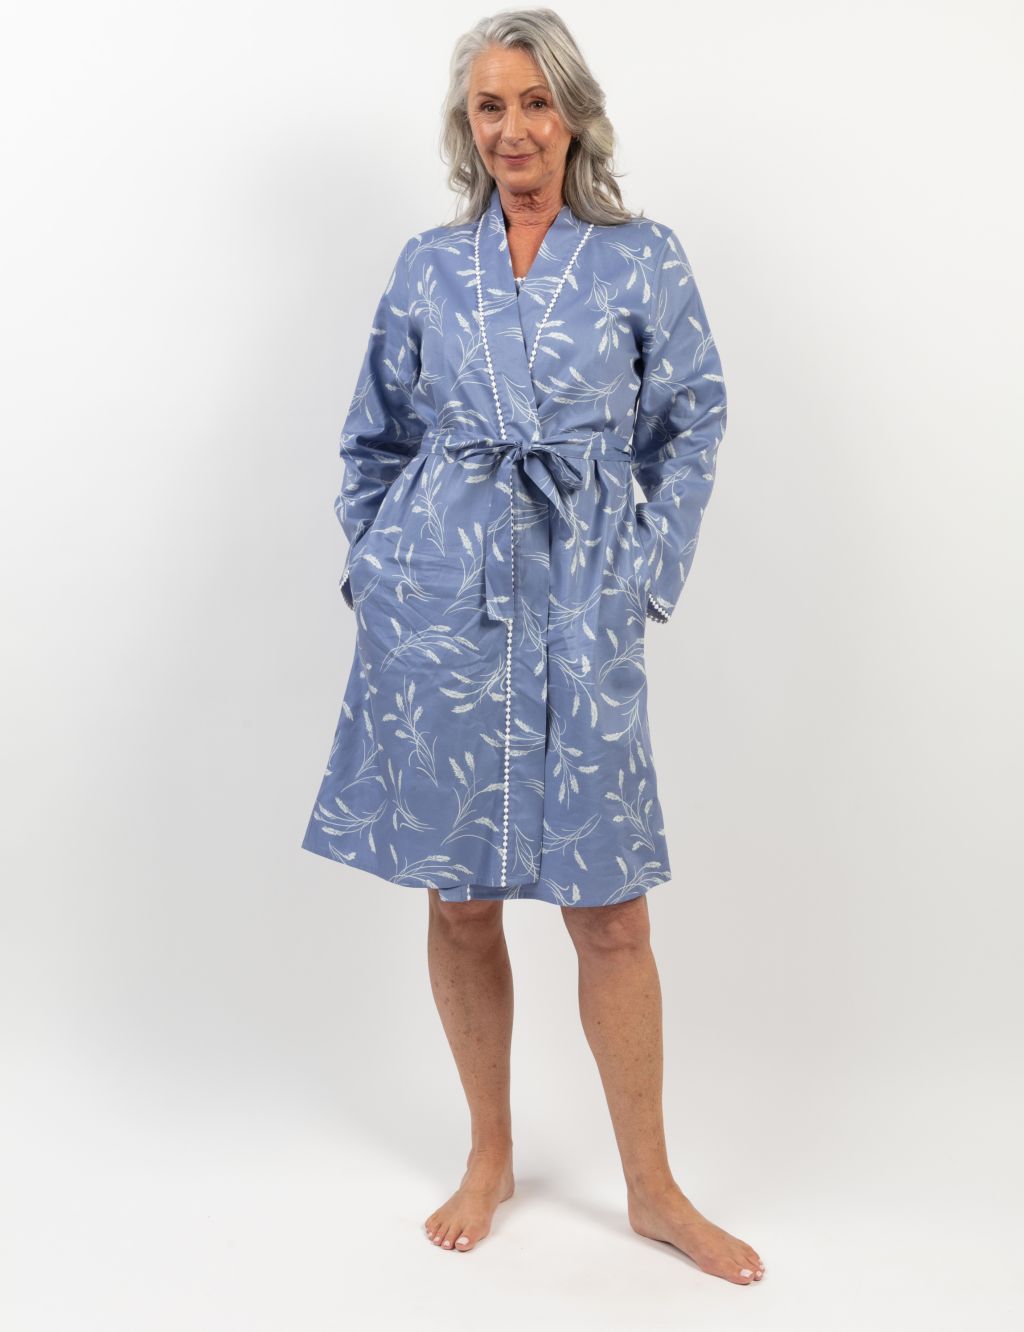 Cotton Modal Wheat Short Dressing Gown image 1